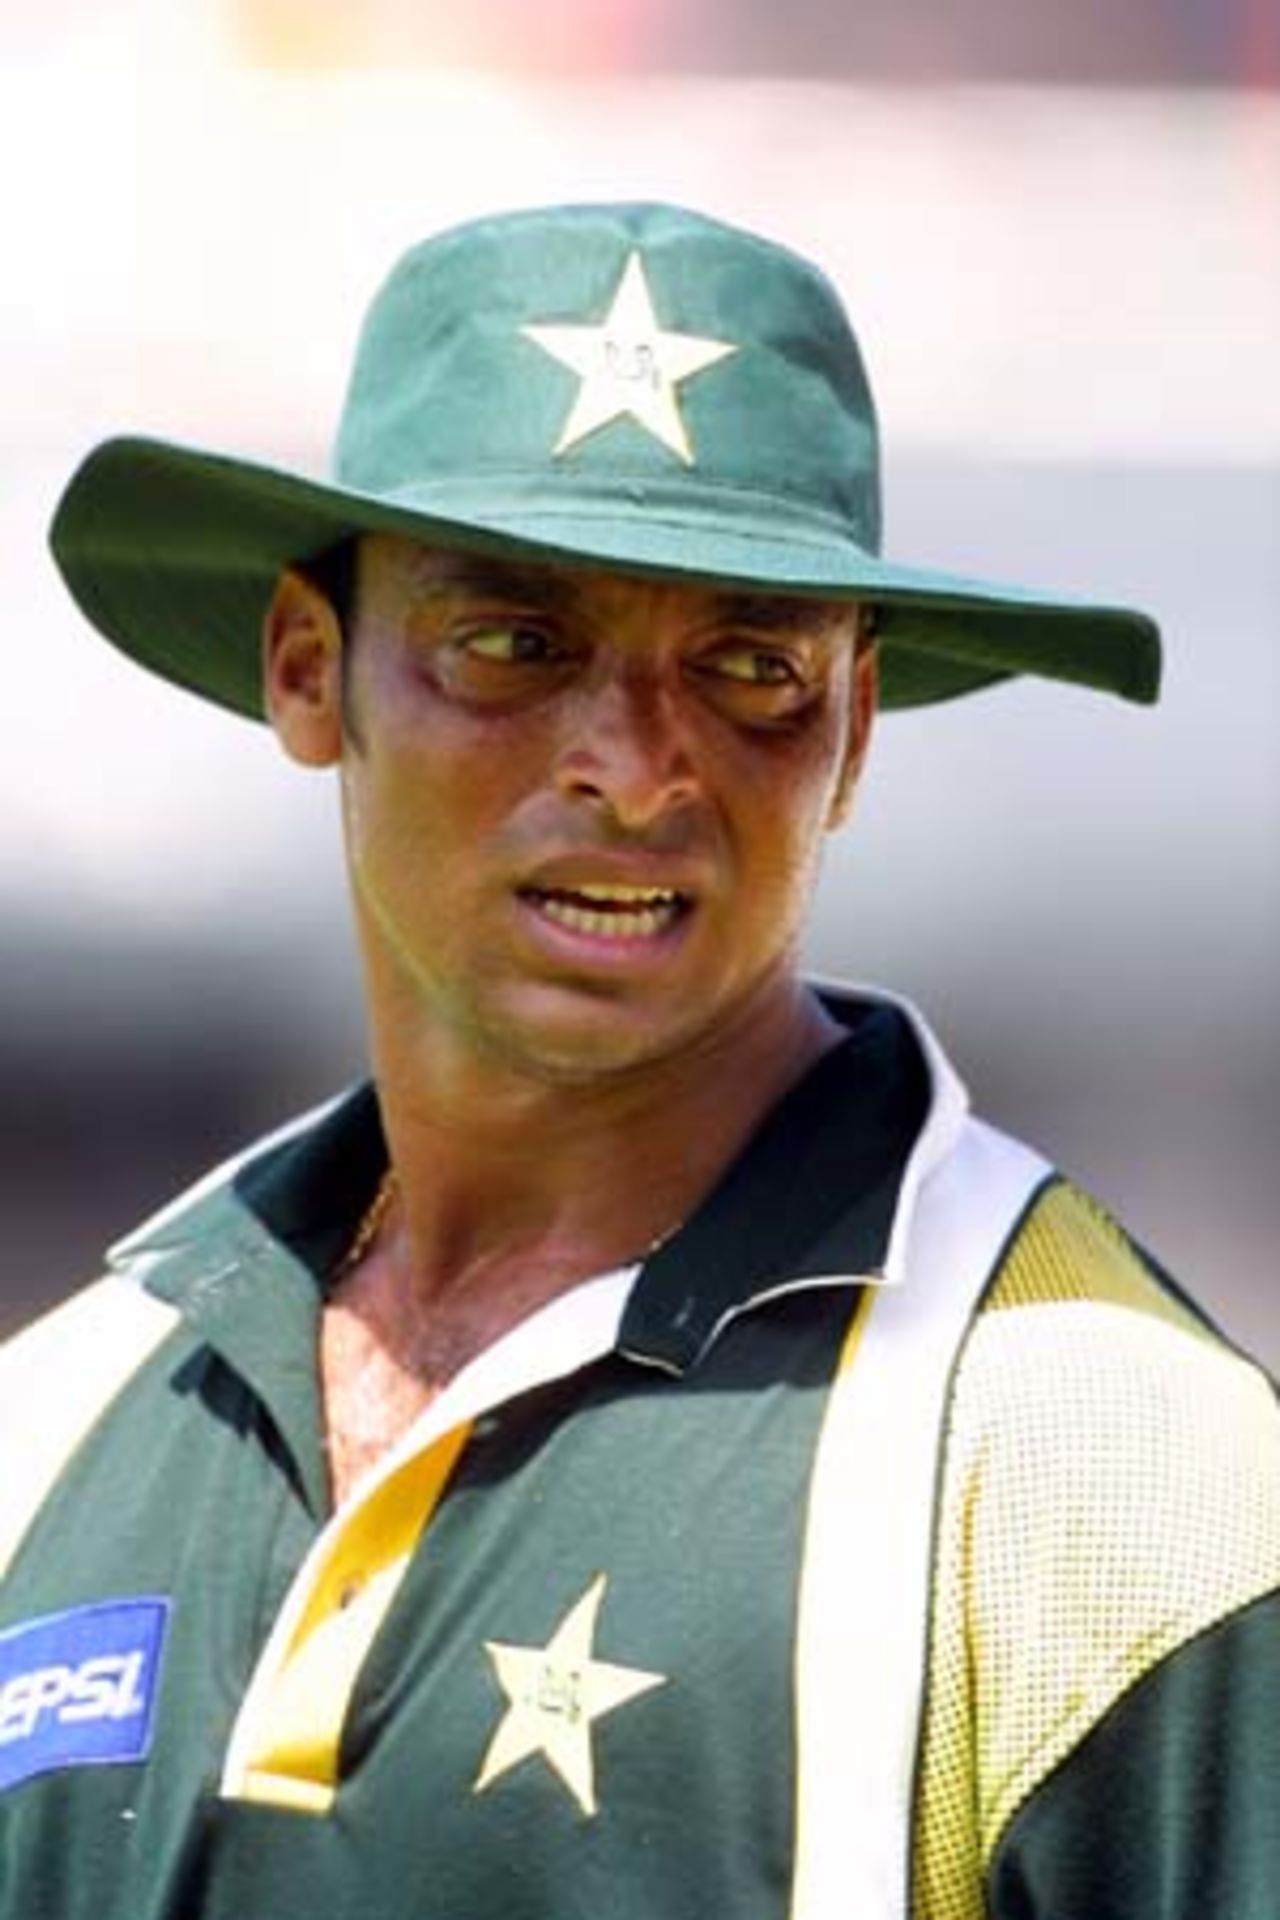 Pakistan fast bowler Shoaib Akhtar in the field during New Zealand's innings. Shoaib took 5-19 from 6.3 overs with the ball. 1st One-Day International: New Zealand v Pakistan at Eden Park, Auckland, 18 February 2001.